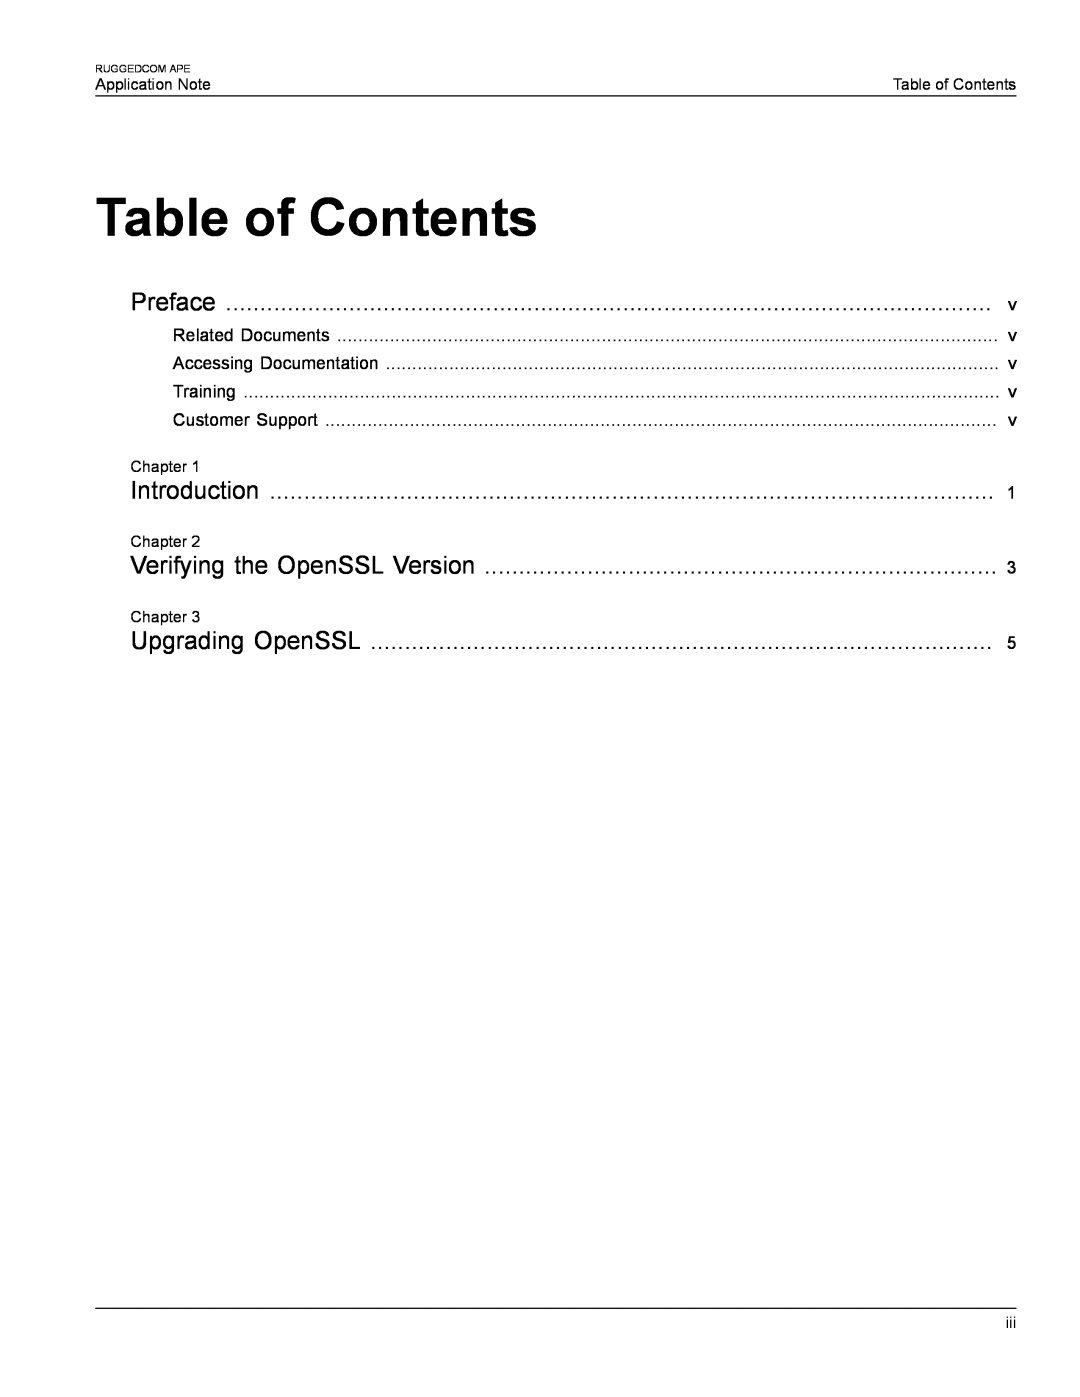 Siemens AN25 manual Table of Contents, Preface, Introduction, Verifying the OpenSSL Version, Upgrading OpenSSL 